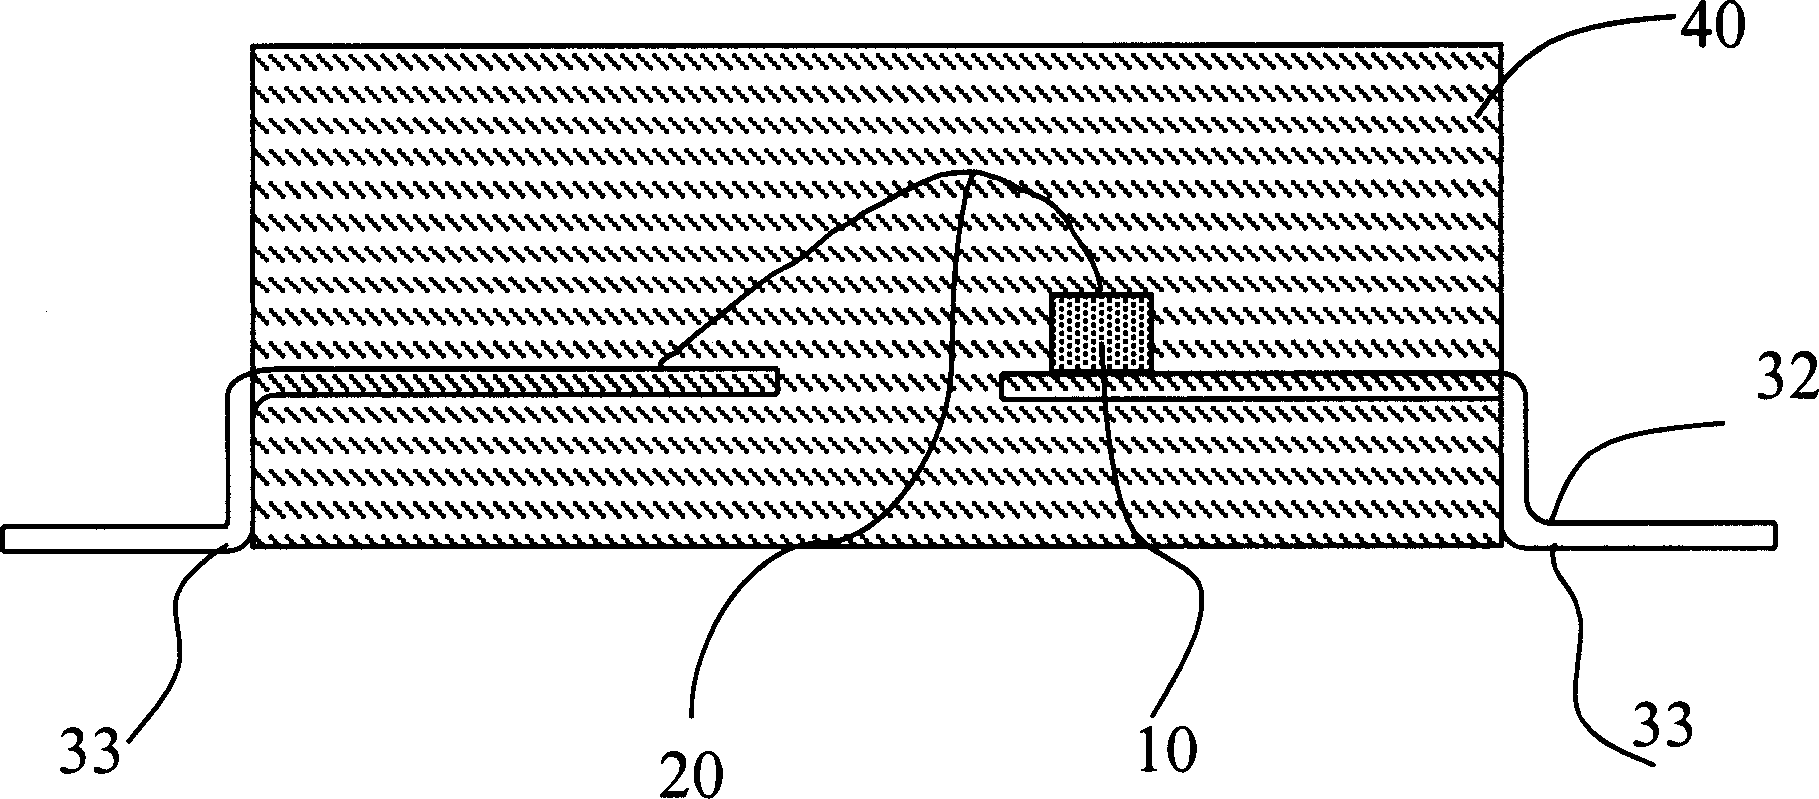 Package structure of surface adhesive light -emitting diode and its producing method